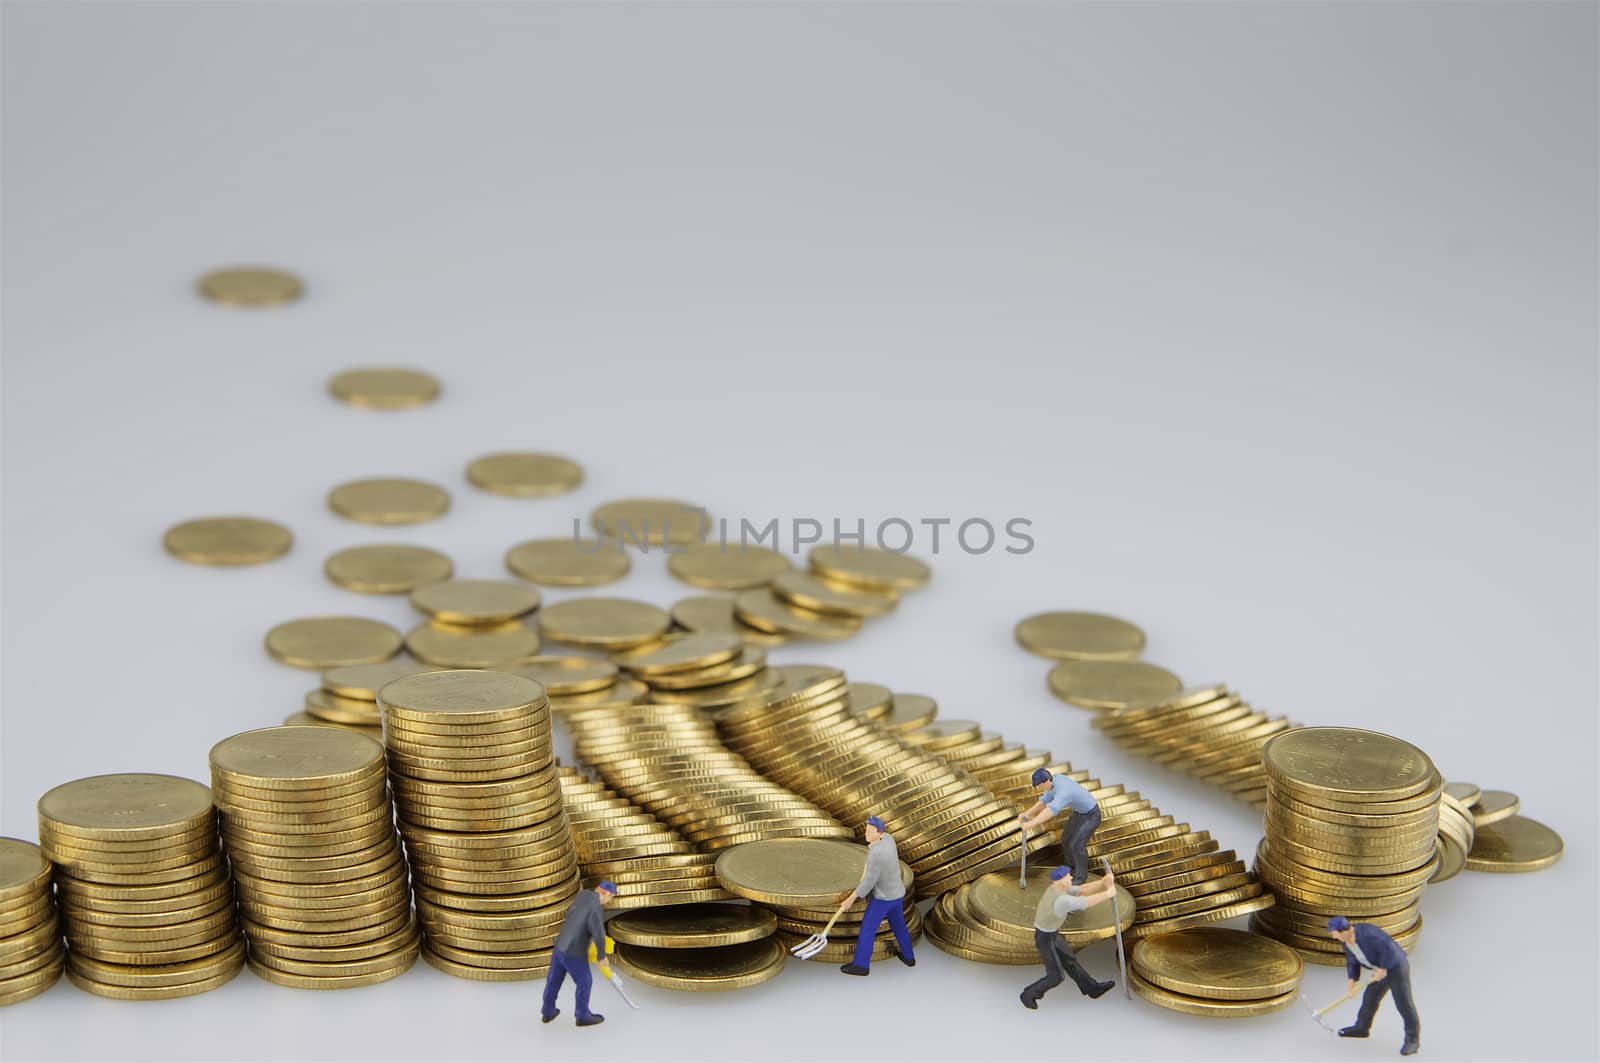 Miniature people are destroyed pile of gold coins on white background.